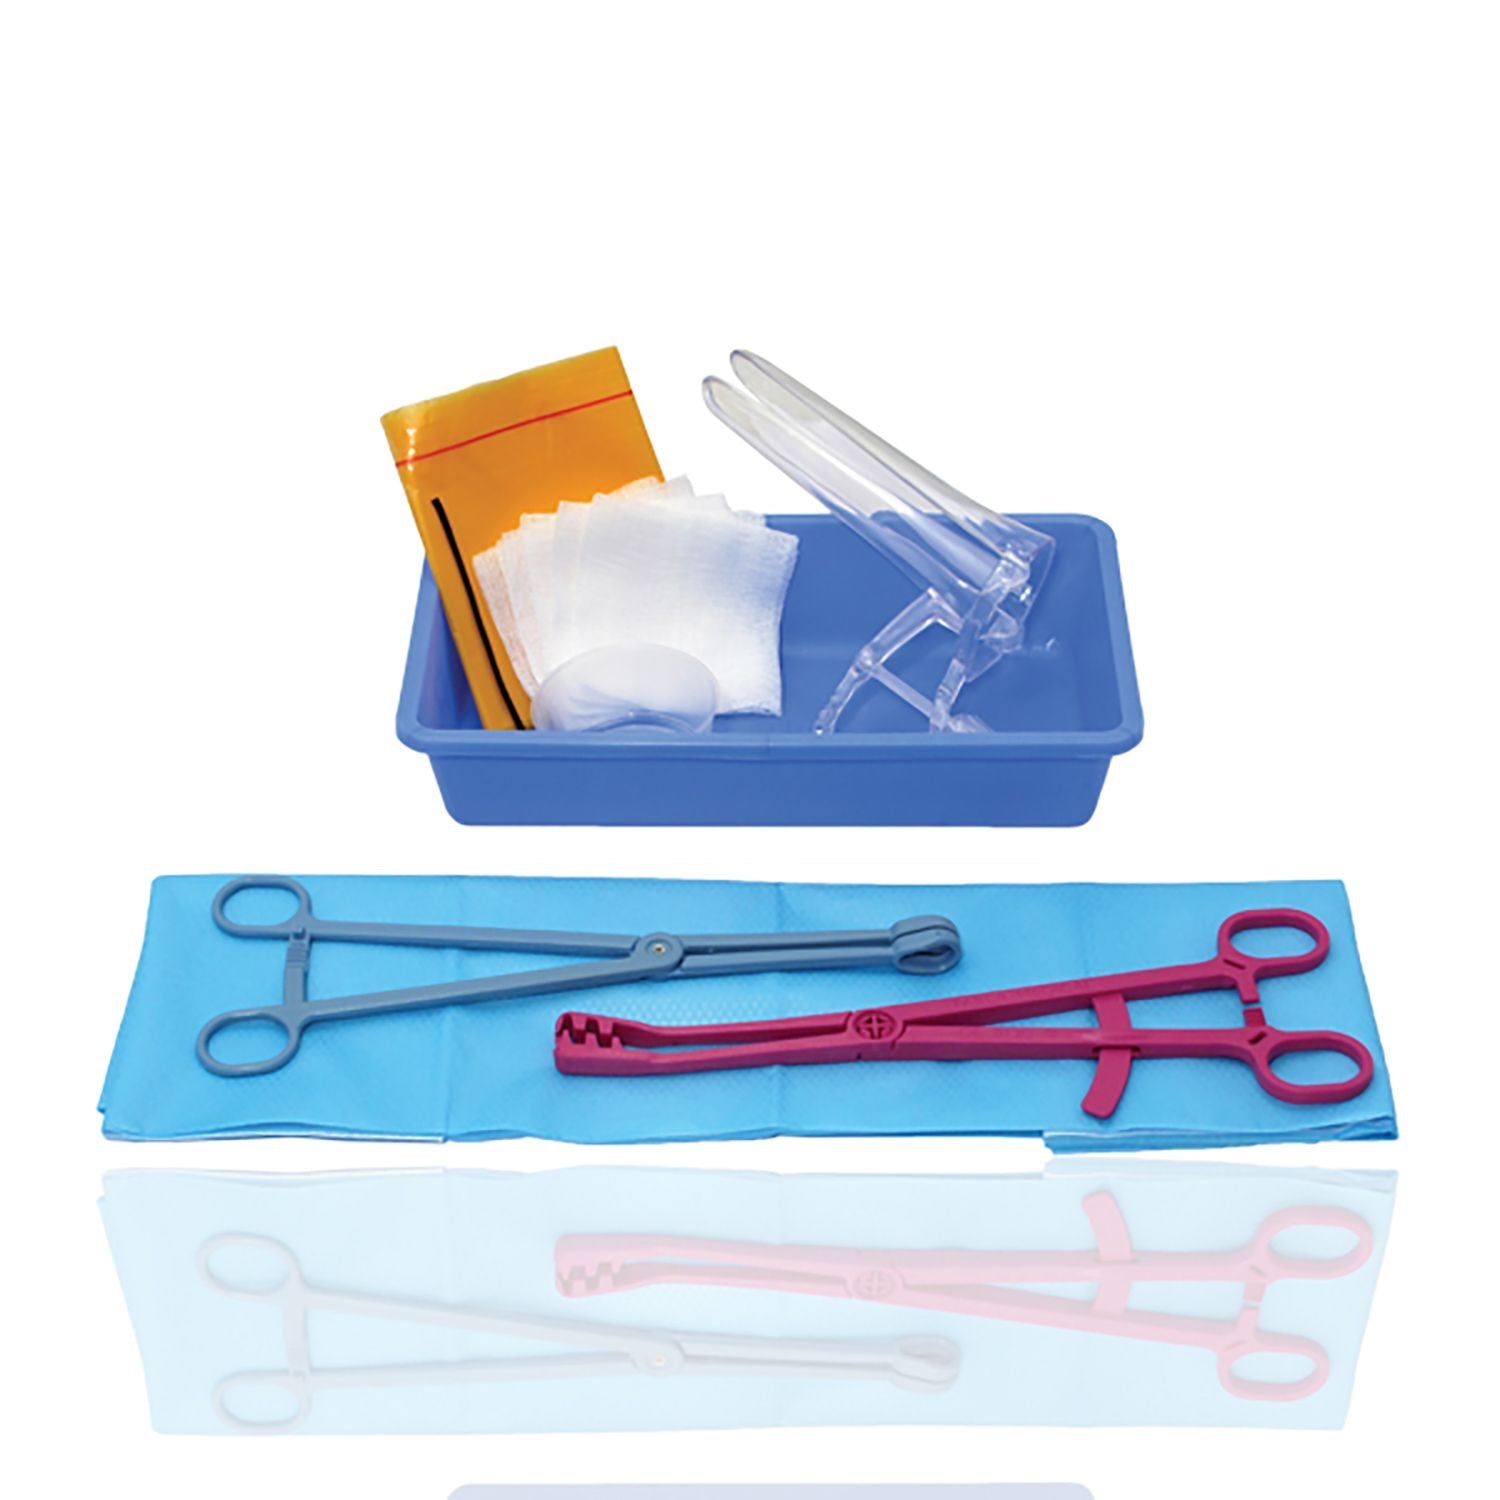 Instramed IUD Removal Kit with Medium-Long Speculum